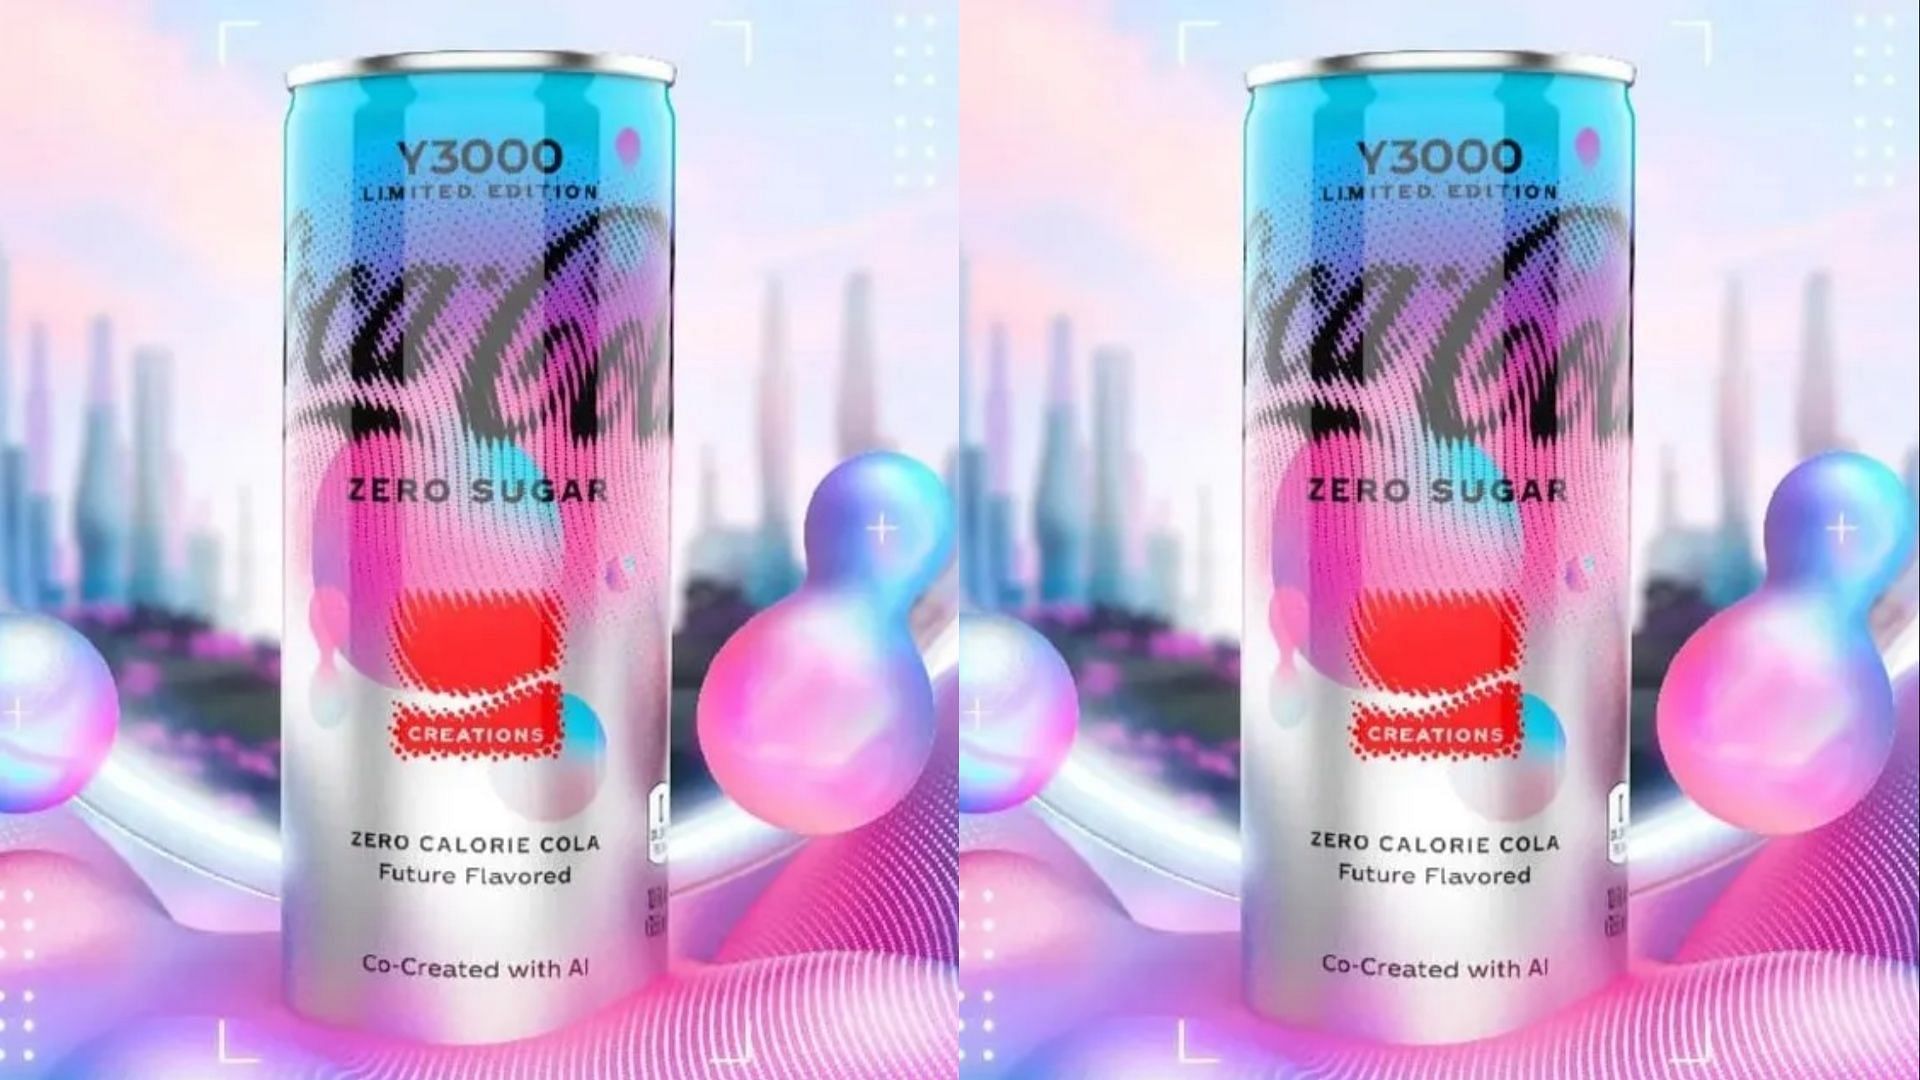 The Y3000 Zero Sugar is available in select markets for a limited time only (Image via Coca-Cola)